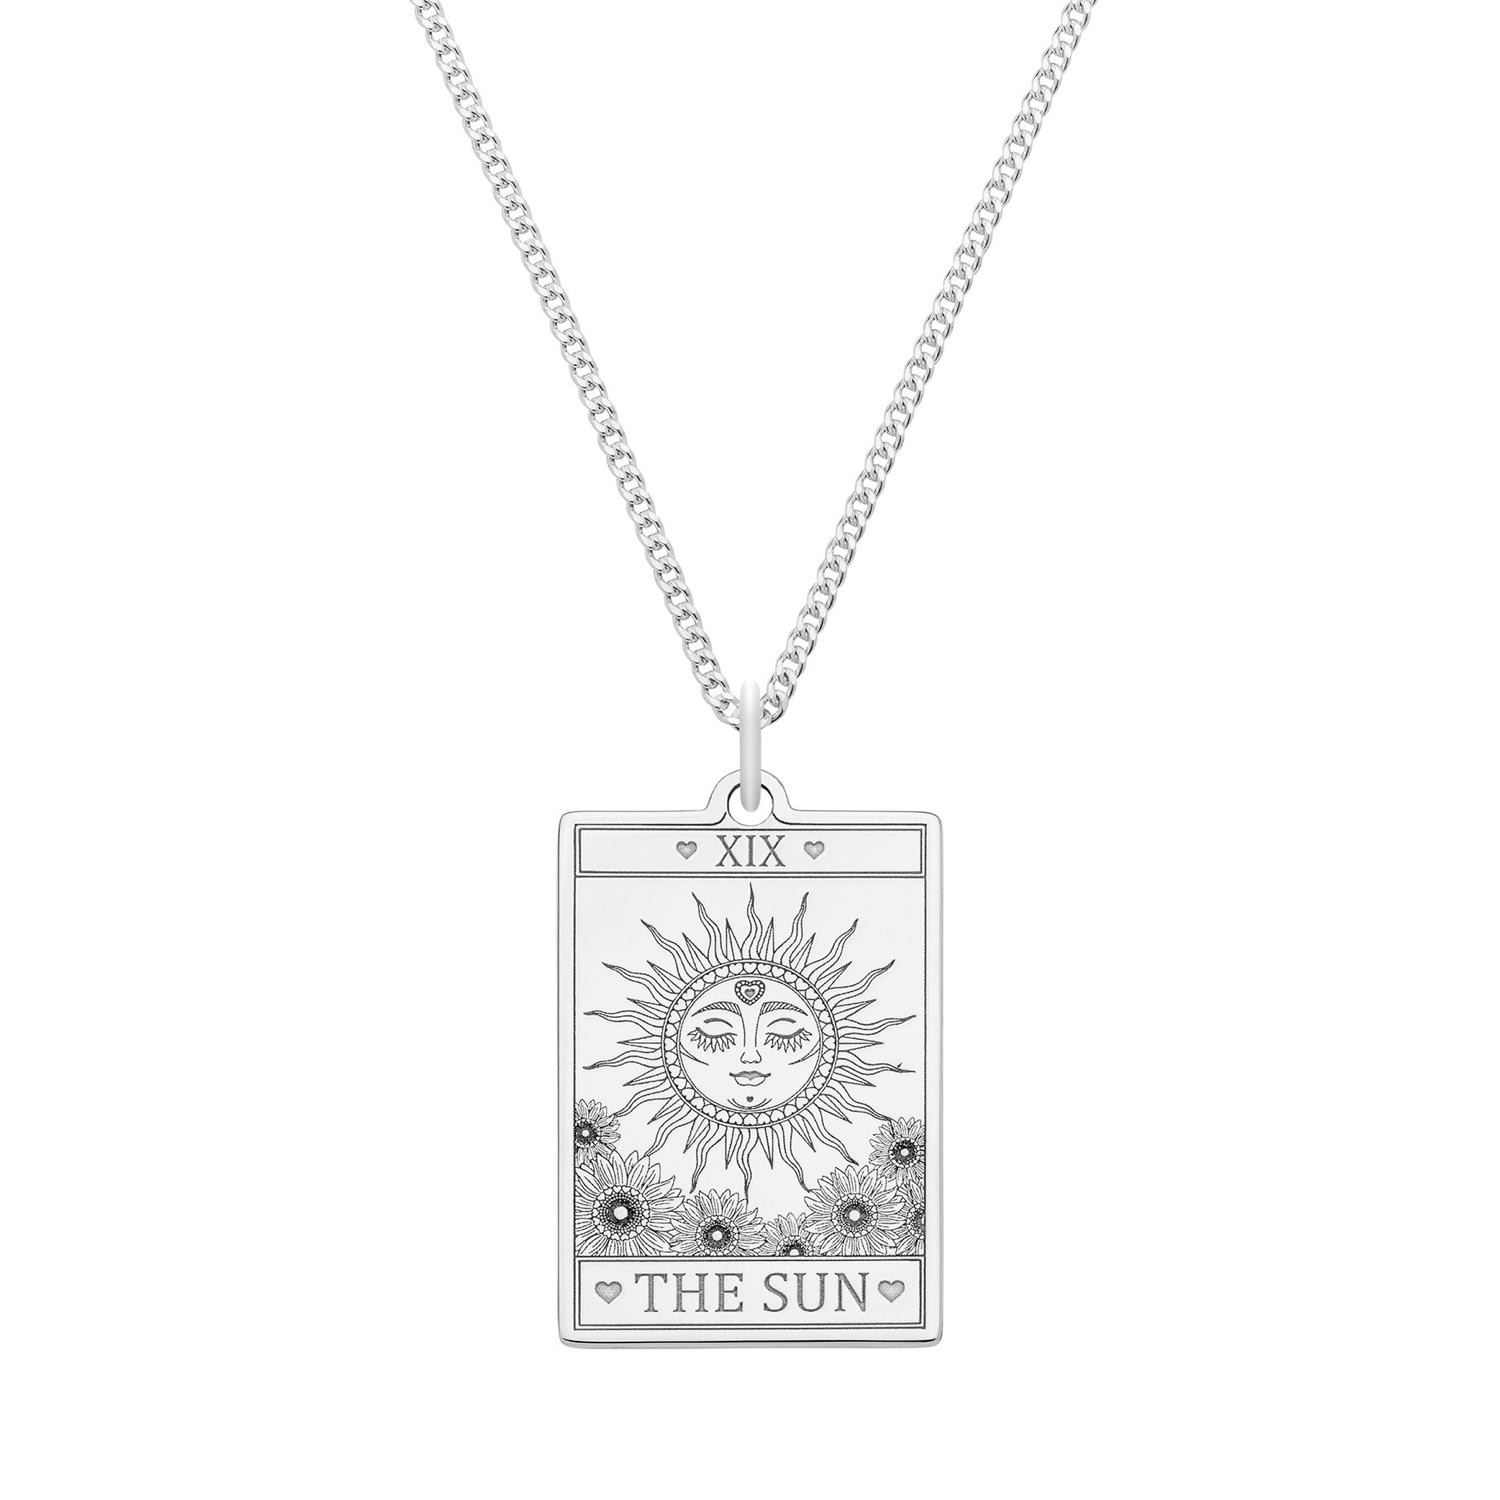 Cartergore Women's Large Sterling Silver “the Sun” Tarot Card Necklace In Metallic